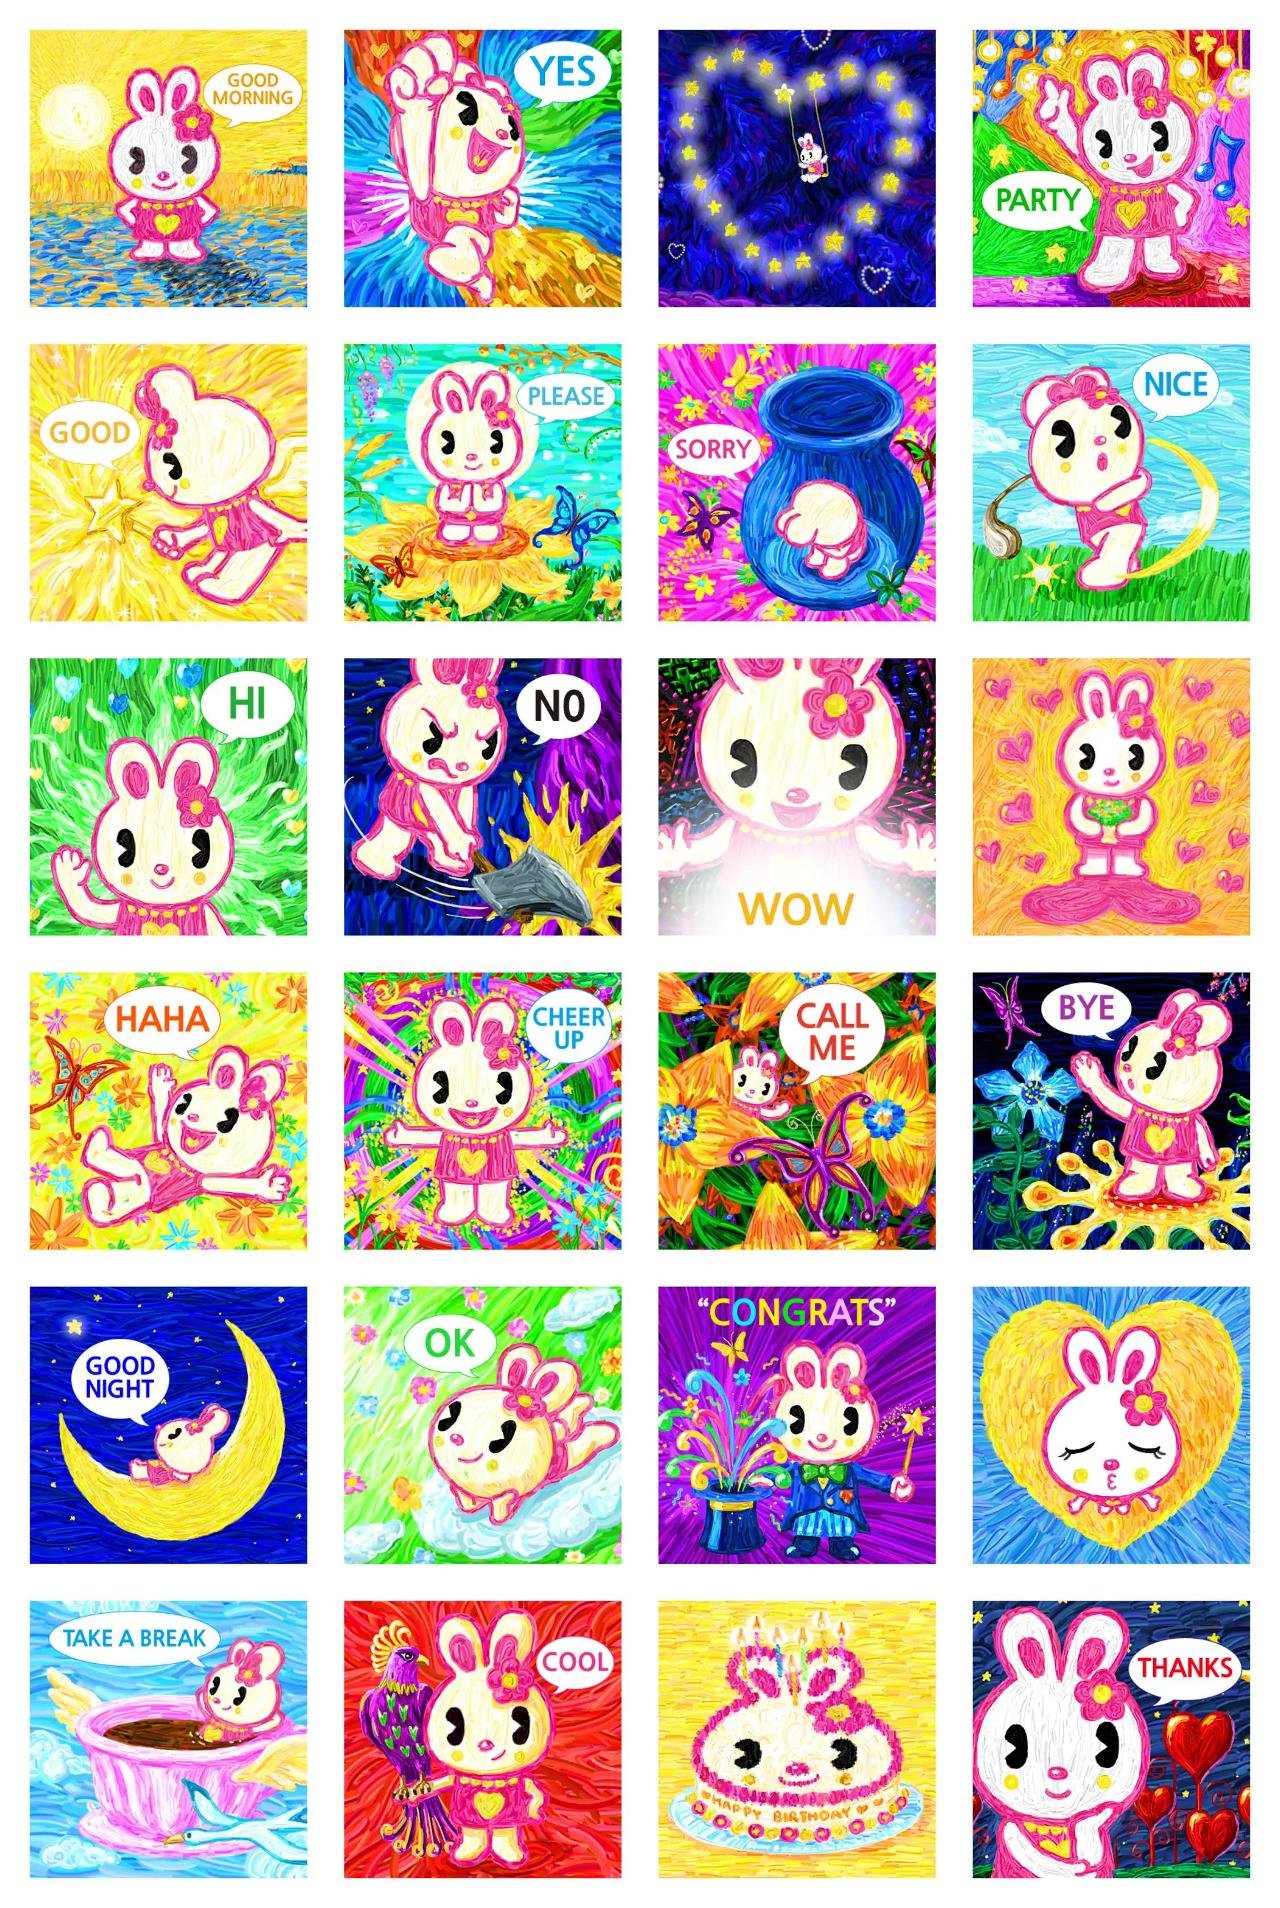 Positive Rabbit Hipani 2 Animals sticker pack for Whatsapp, Telegram, Signal, and others chatting and message apps